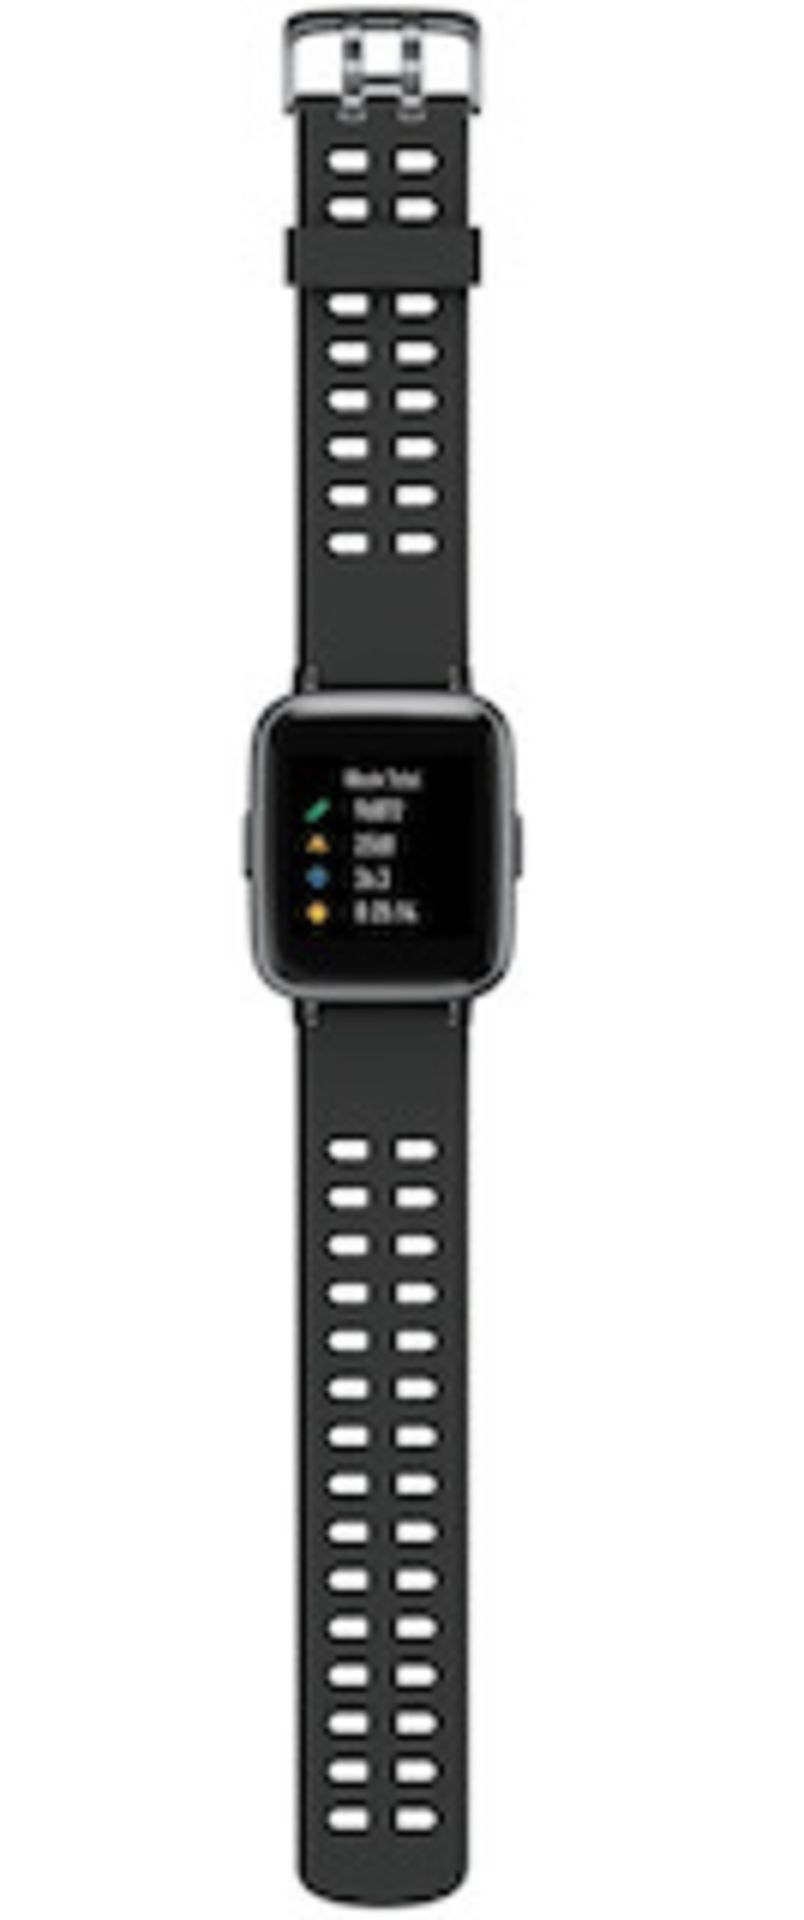 Brand New Unisex Fitness Tracker Watch Id205 Black Strap About This Item 1.3-Inch LCD Colour - Image 10 of 30